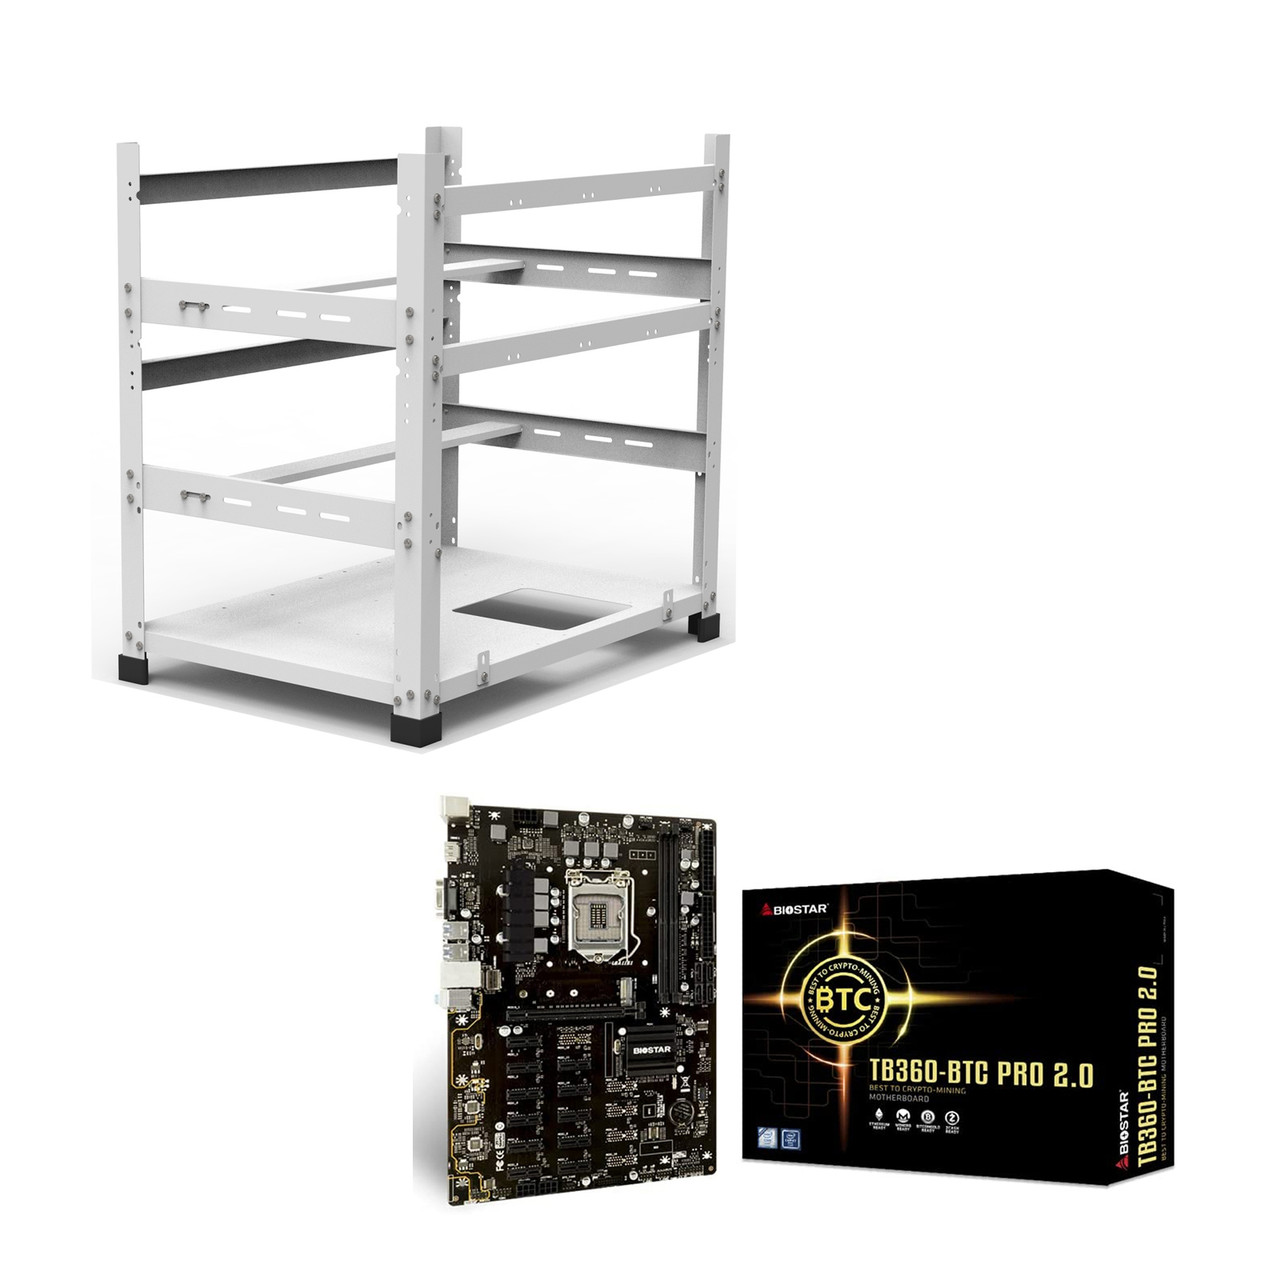 Special Bundle - AAAwave 12GPU Mining Rig Frame (White) & Biostar TB360-BTC PRO 2.0 Ver. 6.x Motherboard Best to Crypto-Mining